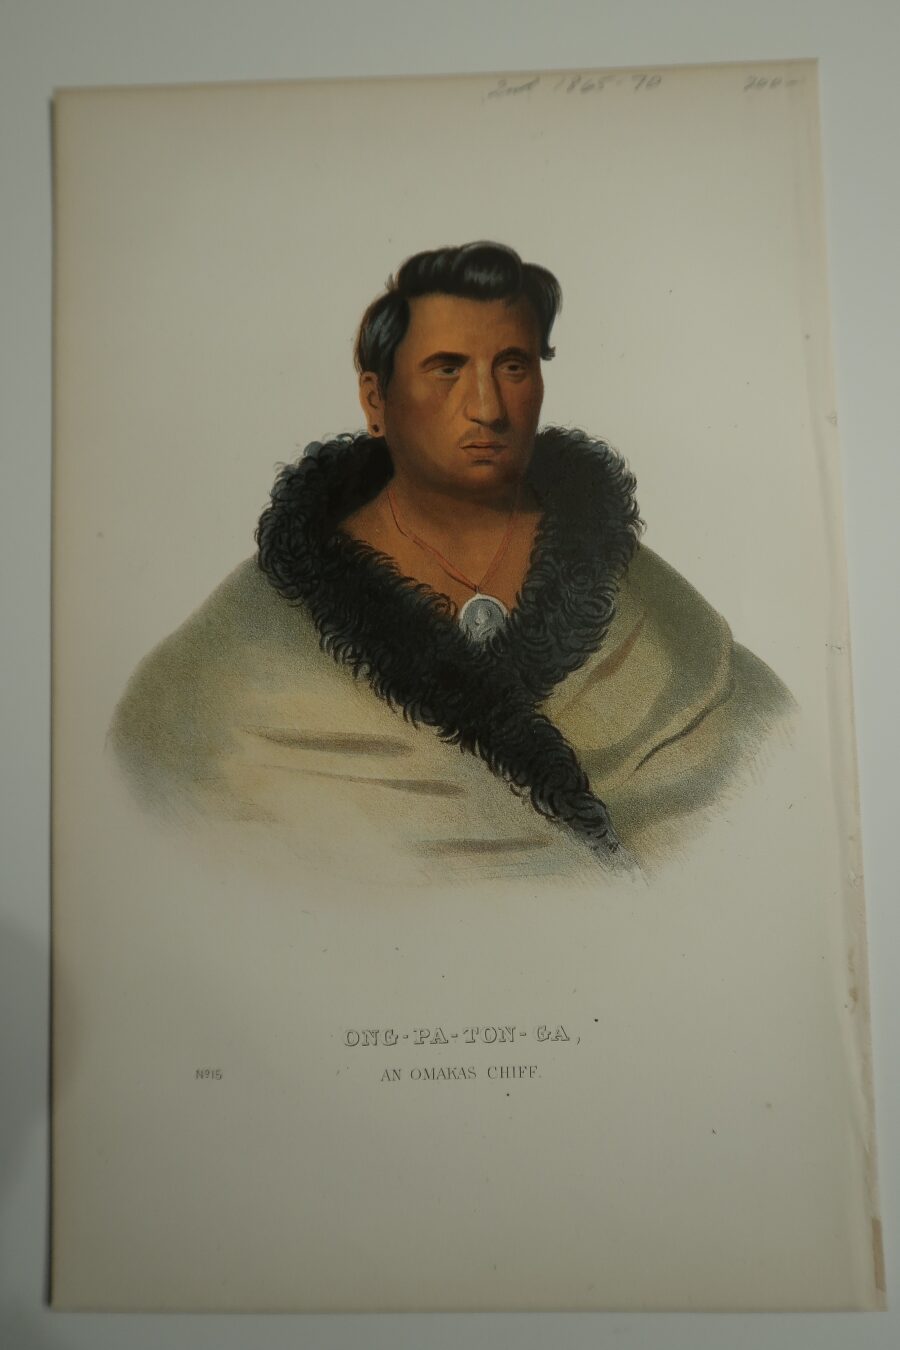 American Indians Antique Lithographs, Ong-Pa-Ton-Ga, is an Omakas Chief. Blanket indian, buffalo trim, wearing medal, 2nd edition, no.15.